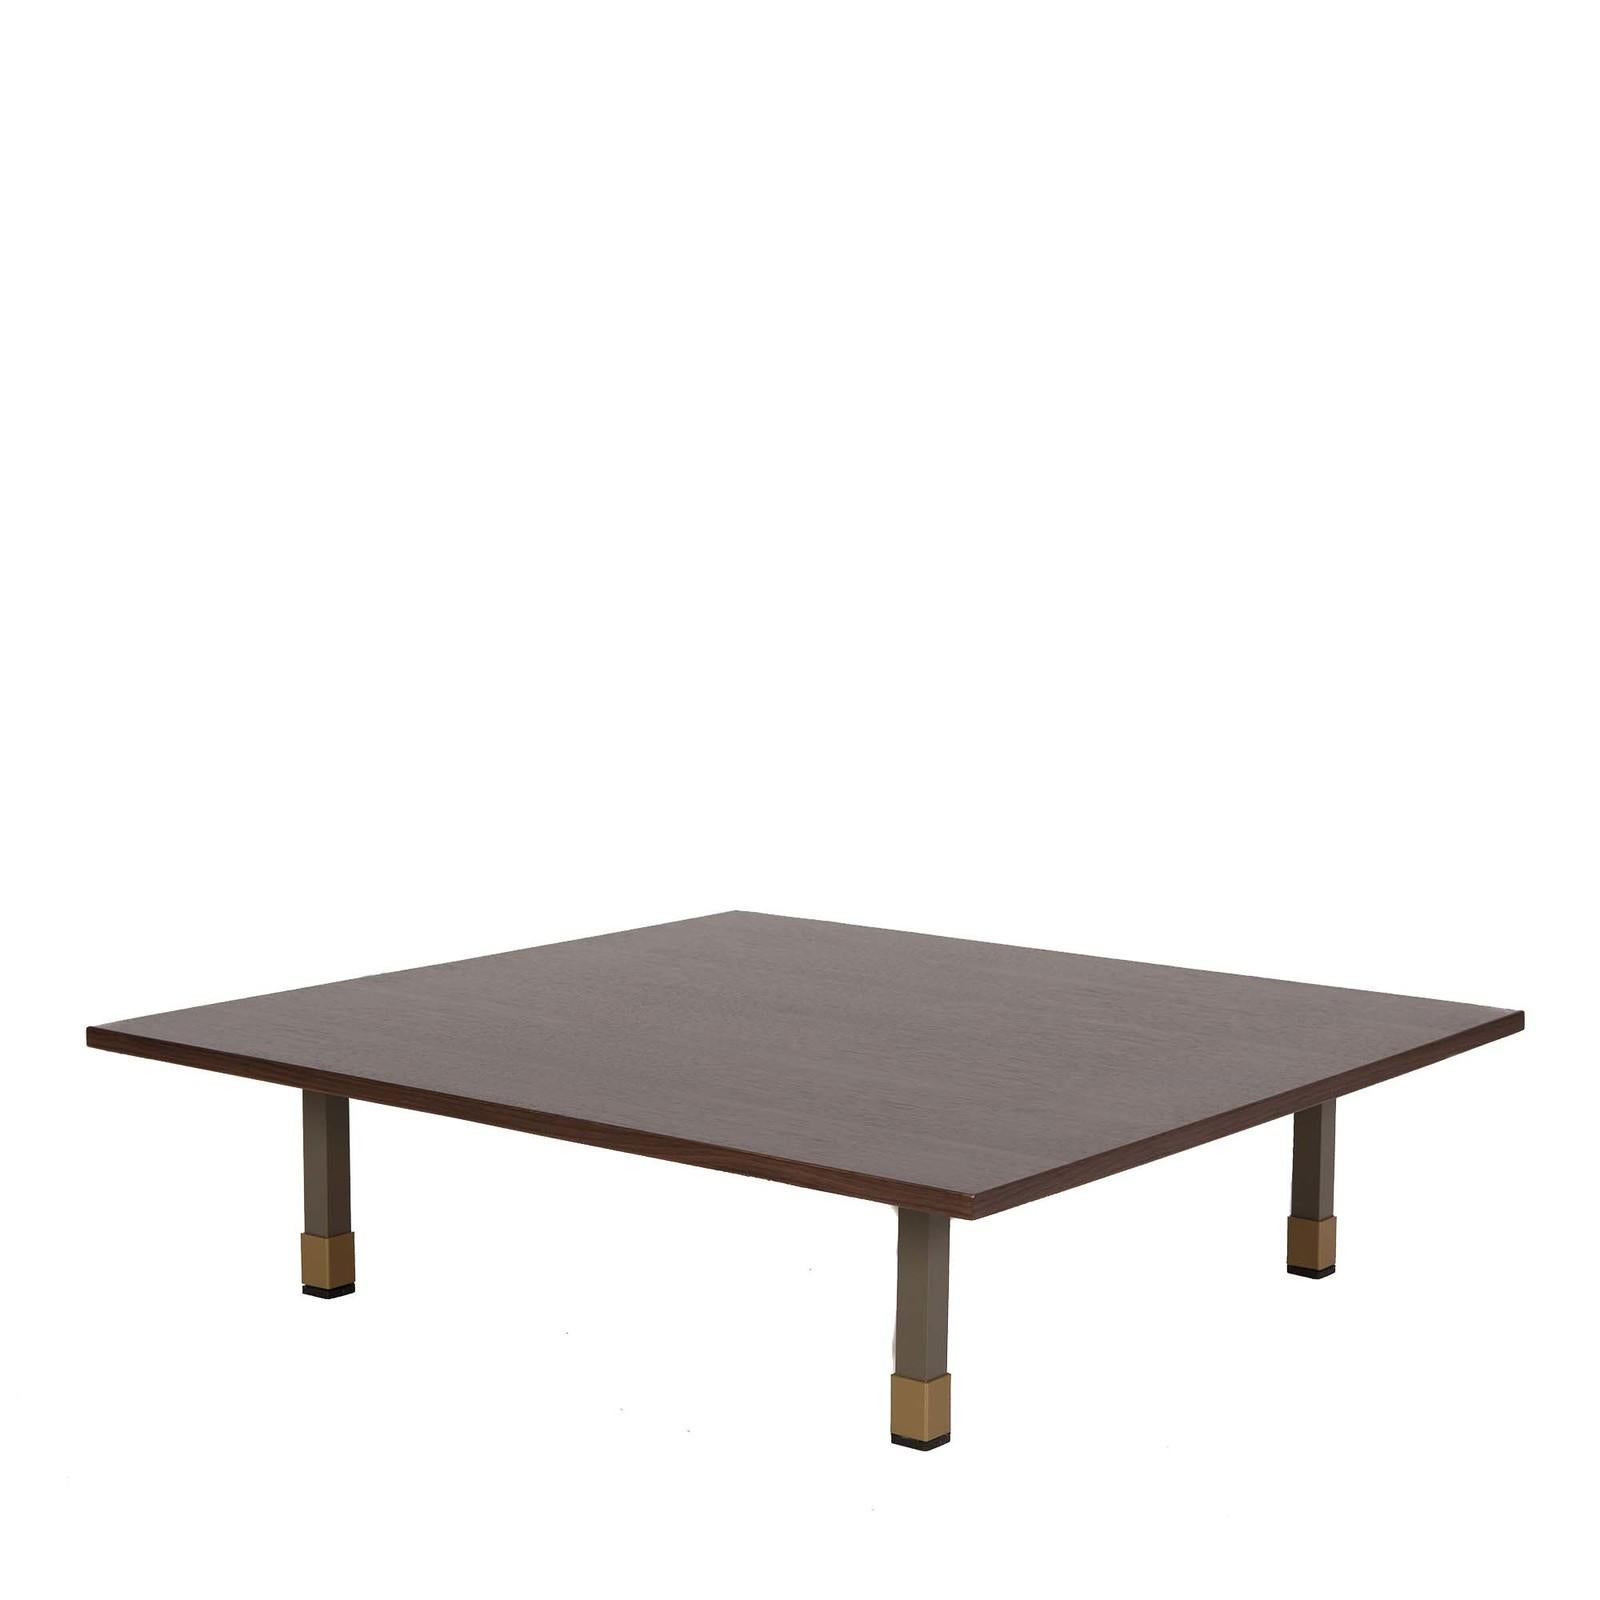 Elegant and lightweight, this coffee table features high-quality materials and finishings suitable for outdoors. The varnished aluminum structure comprises two pairs of legs partly covered with refined leather, entirely hand-stitched and adorned